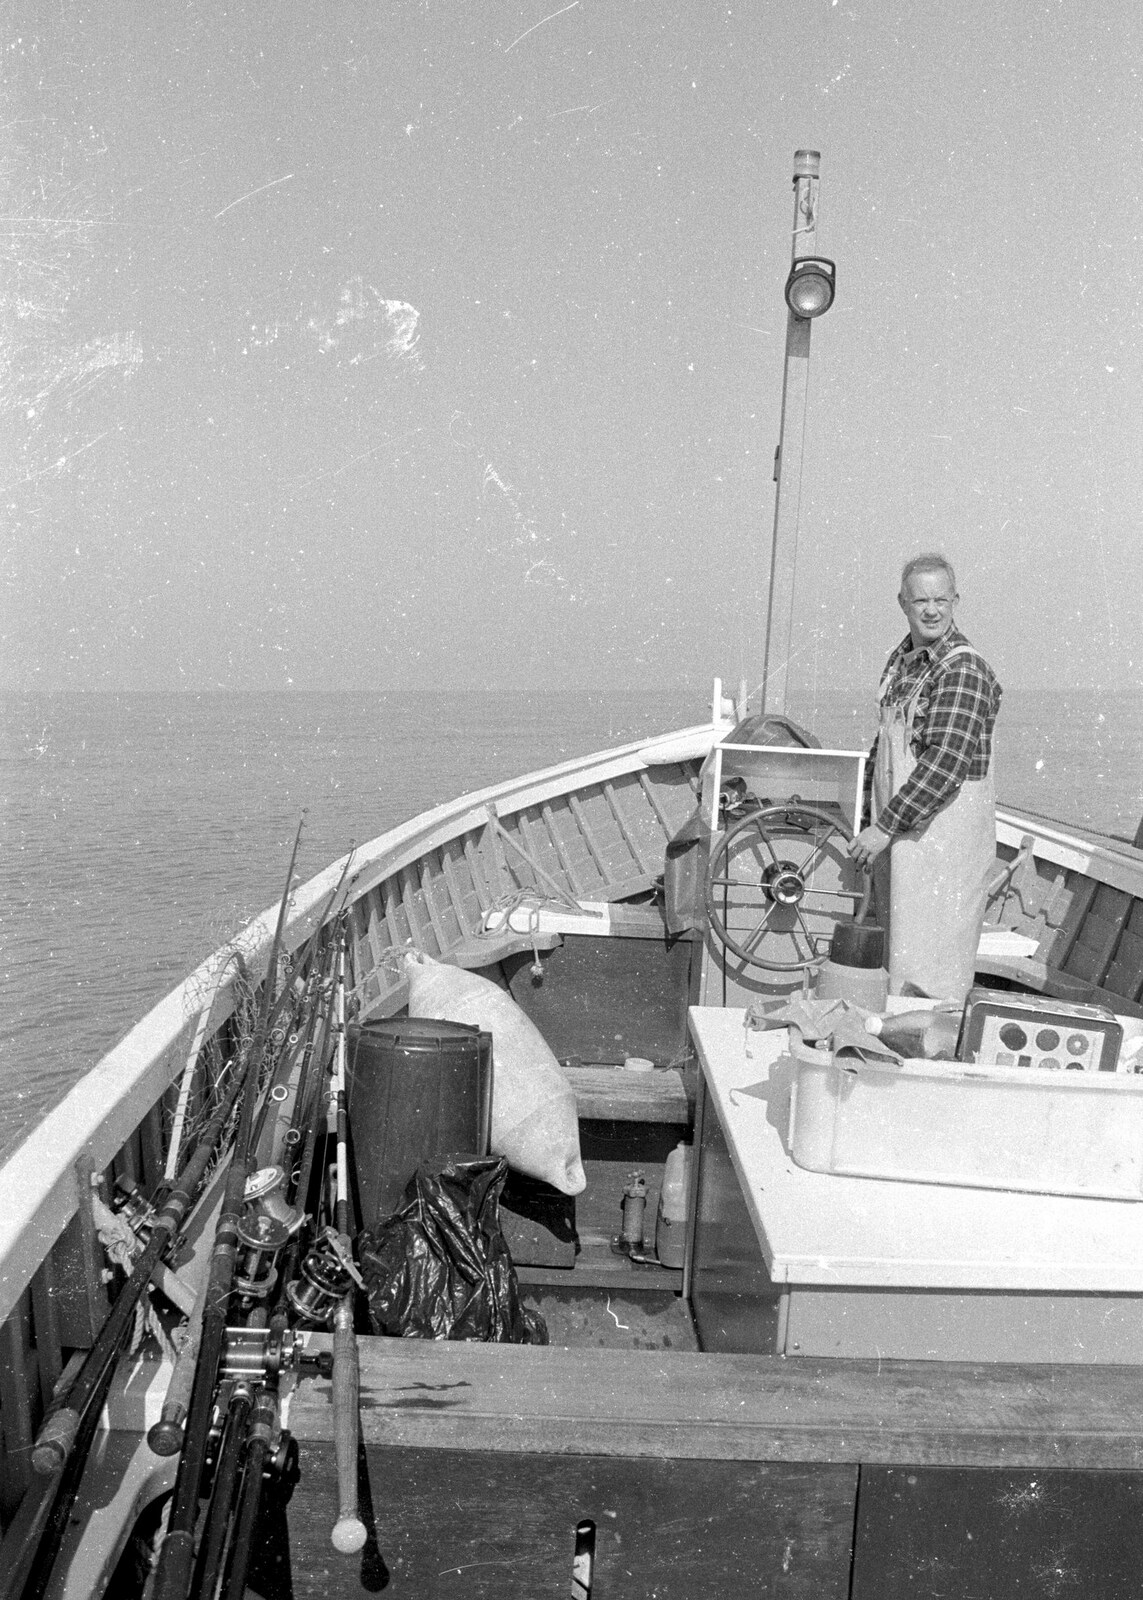 David looks back from the helm from A Fishing Trip on the Linda M, Southwold, Suffolk - 25th April 1993